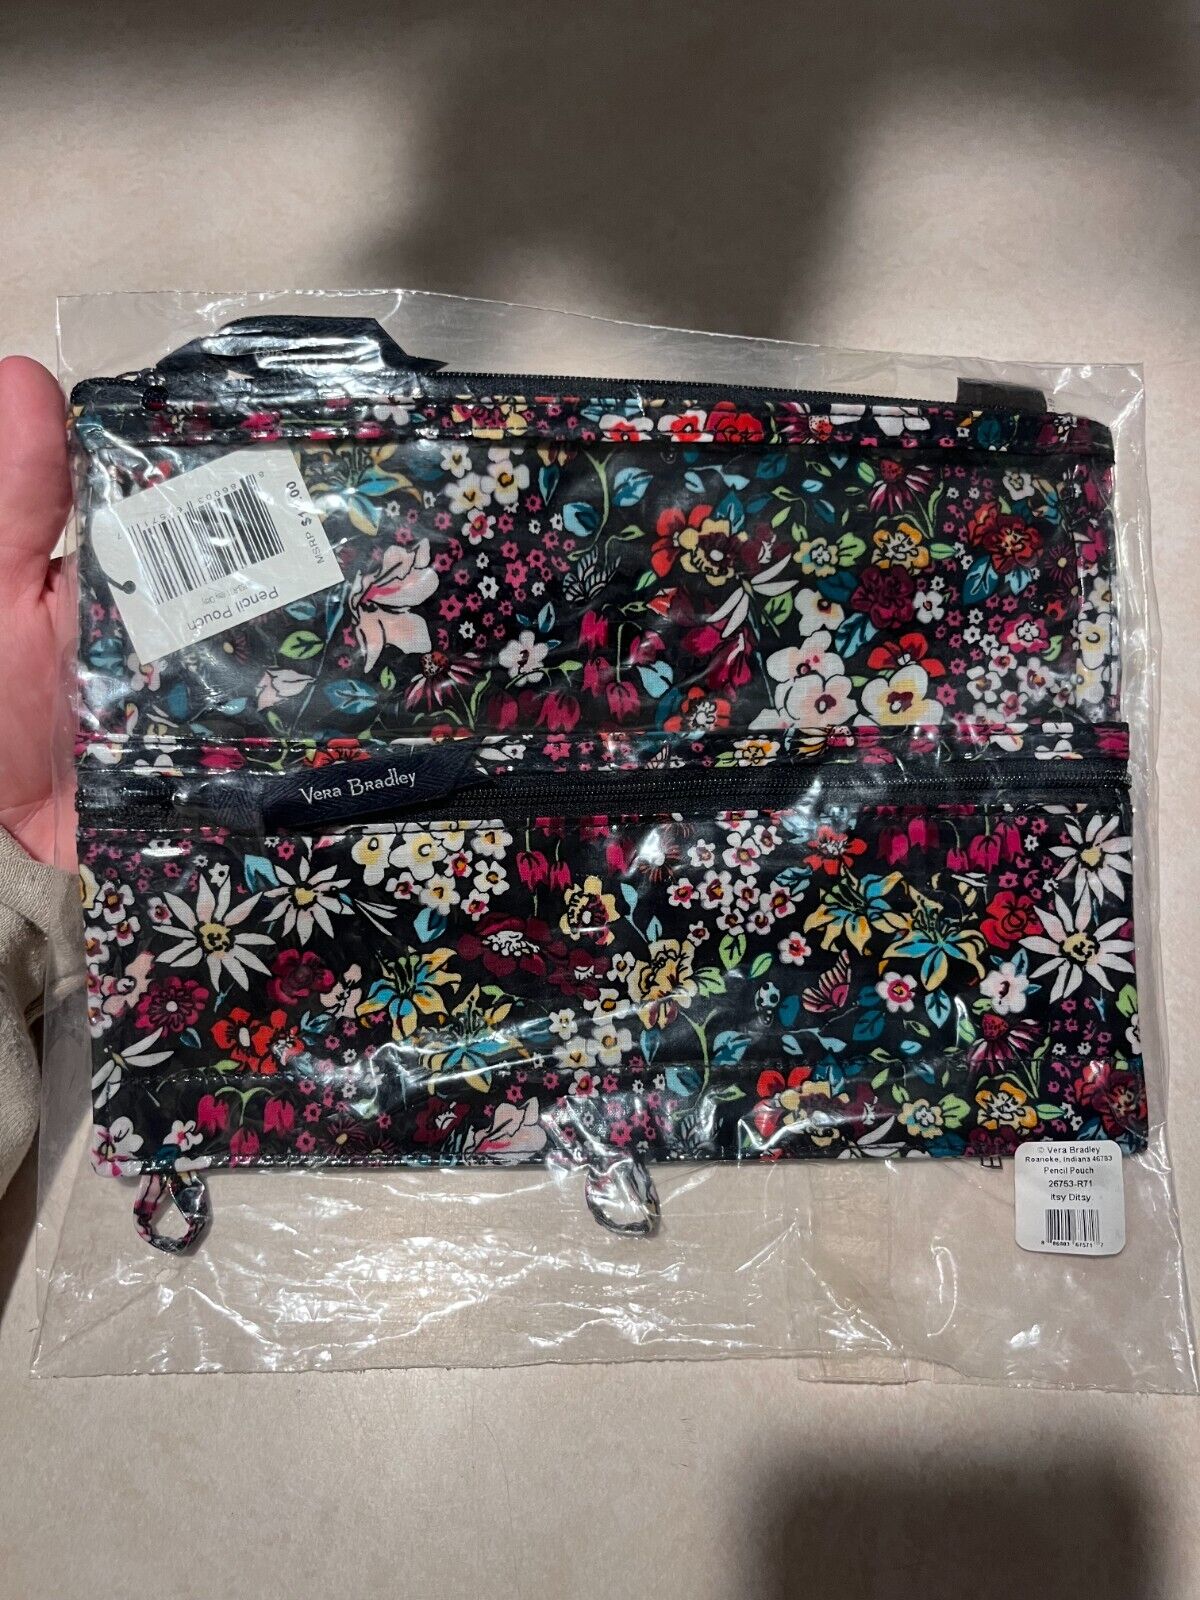 FACTORY SEALED NWT Vera Bradley Pencil Pouch RETIRED pattern Itsy Ditsy